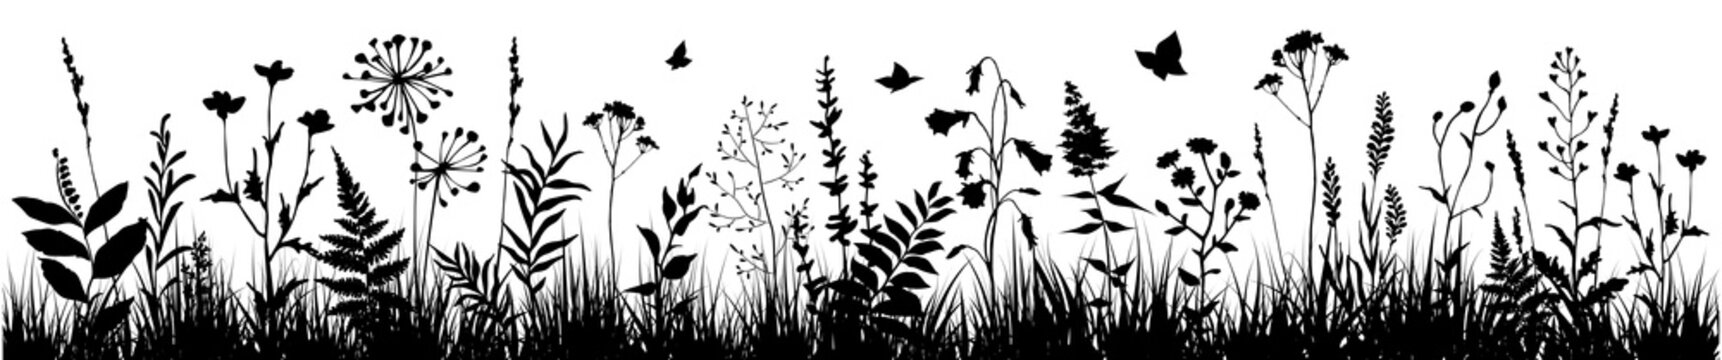 Background with black silhouettes of meadow wild herbs and flowers. Wildflowers. Floral background. Wild grass. Vector illustration.